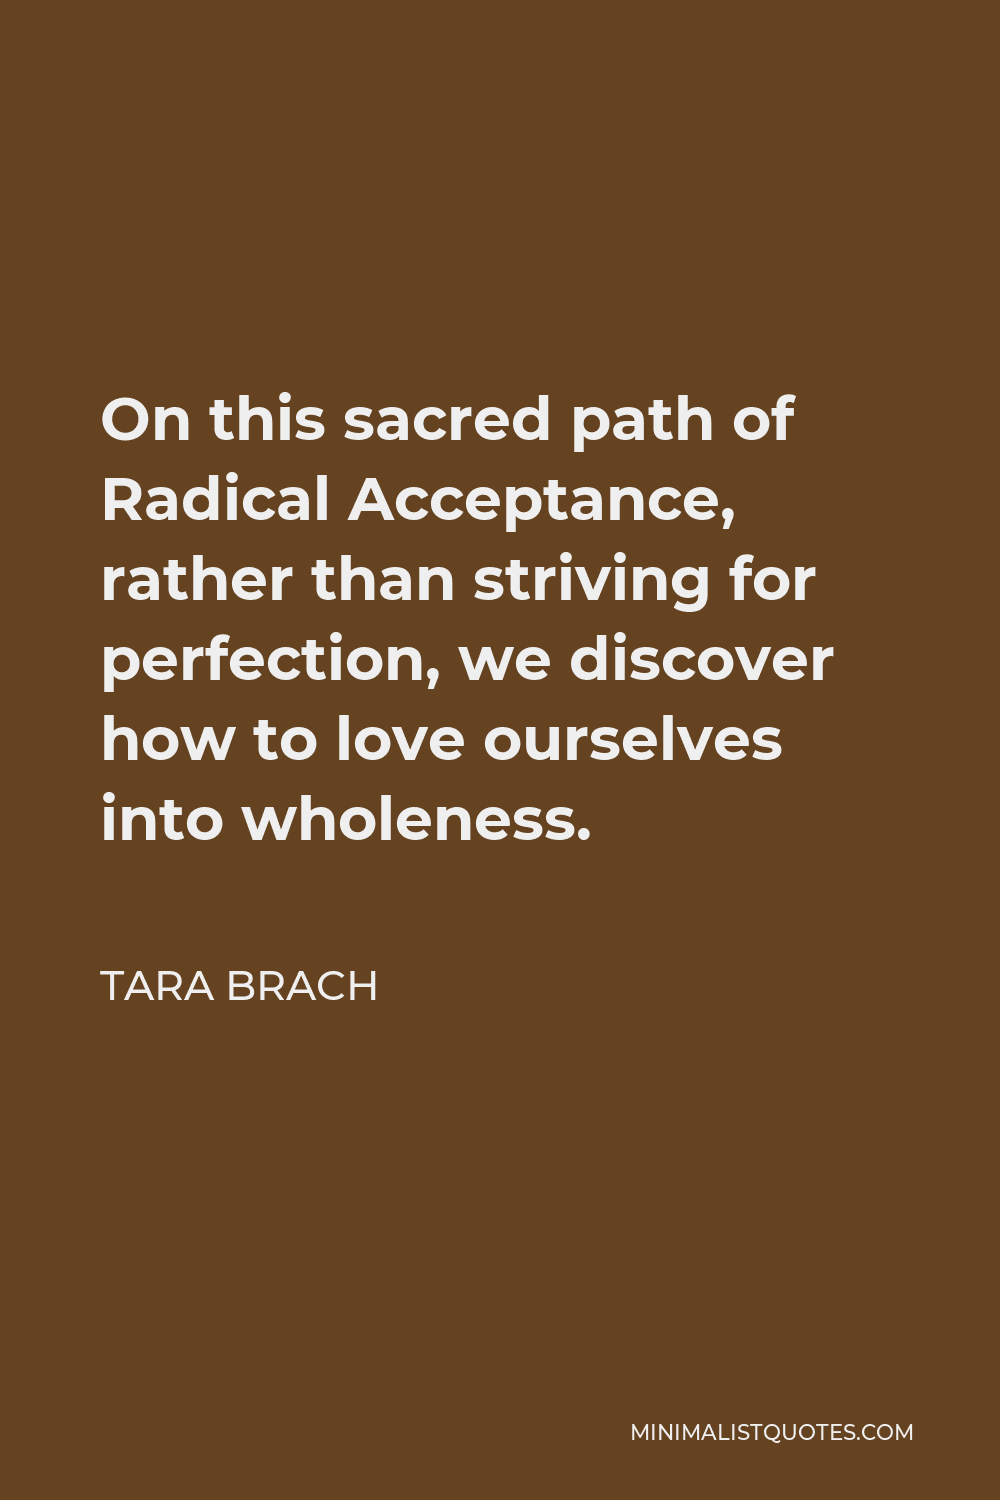 Tara Brach Quote - On this sacred path of Radical Acceptance, rather than striving for perfection, we discover how to love ourselves into wholeness.